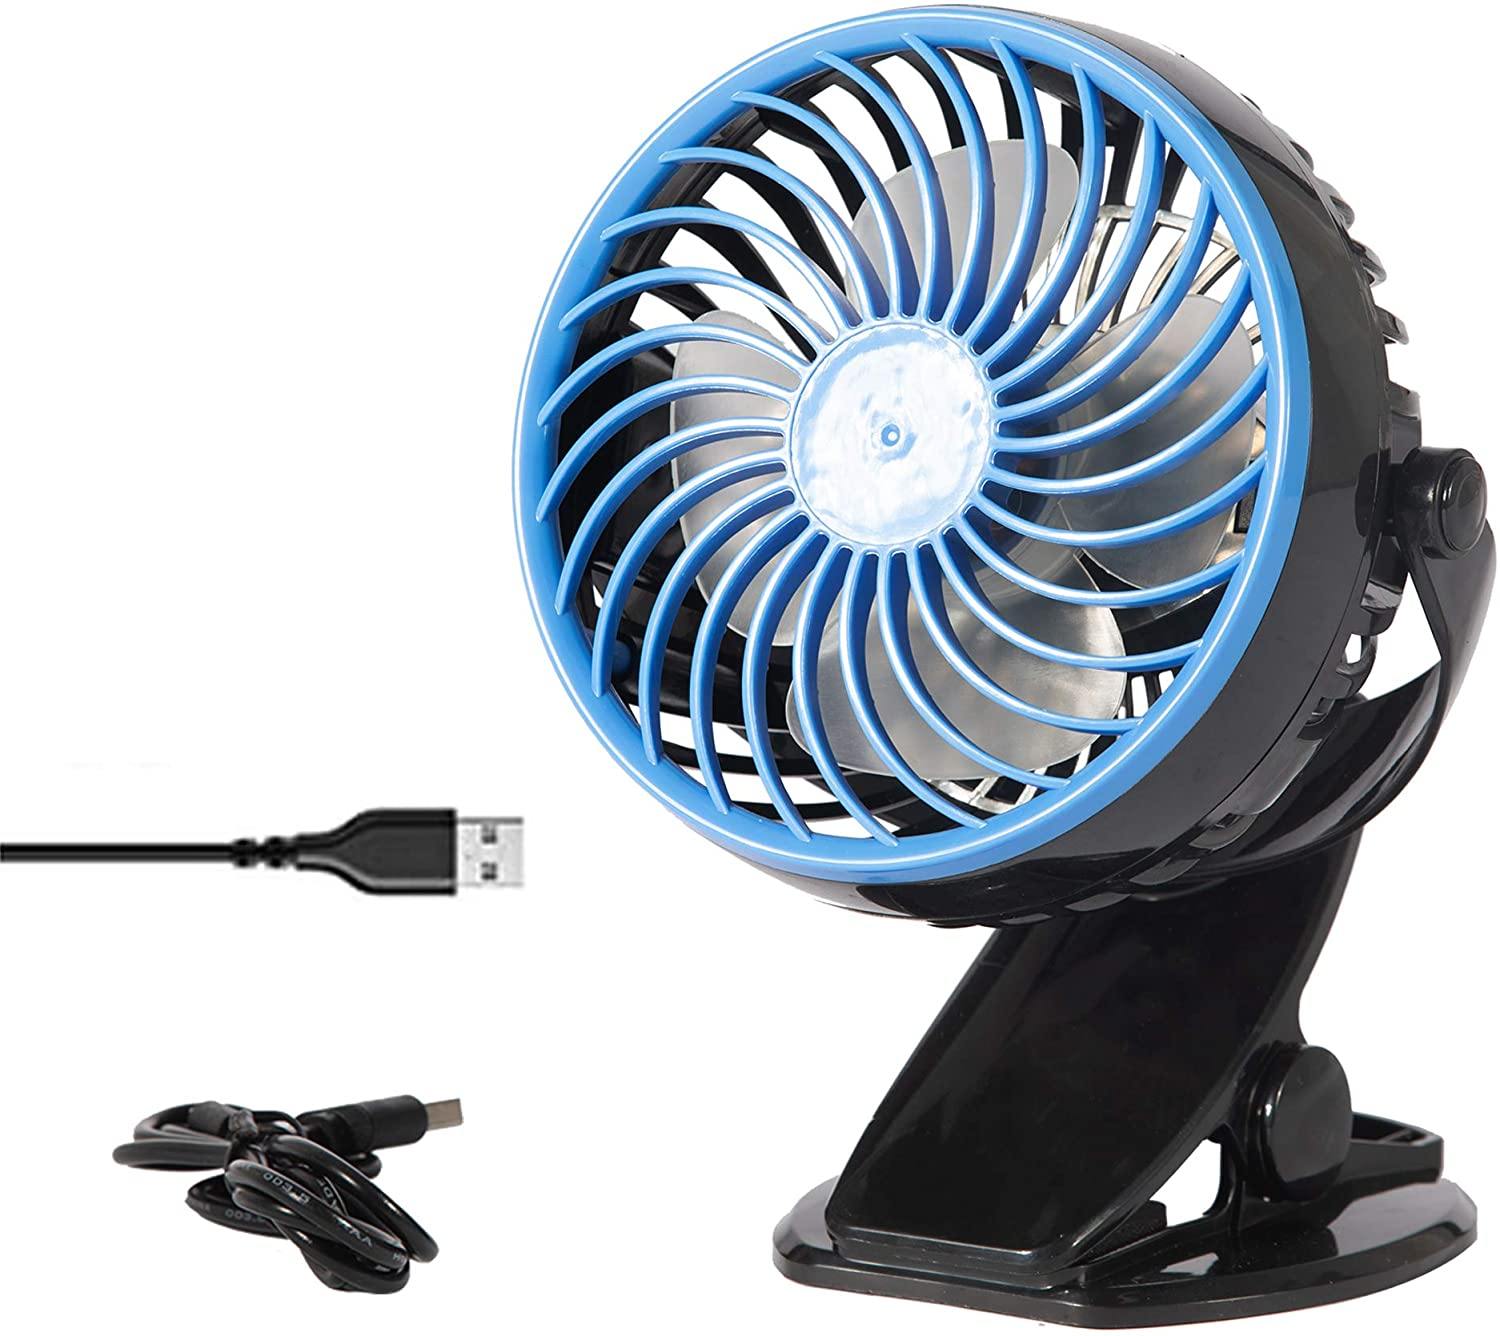 Mini USB Powered Desk Fan can 360 degree rotation Fan Speed Adjustable, Personal Fan Strong Airflow and Quiet for Home Office - Bosonshop